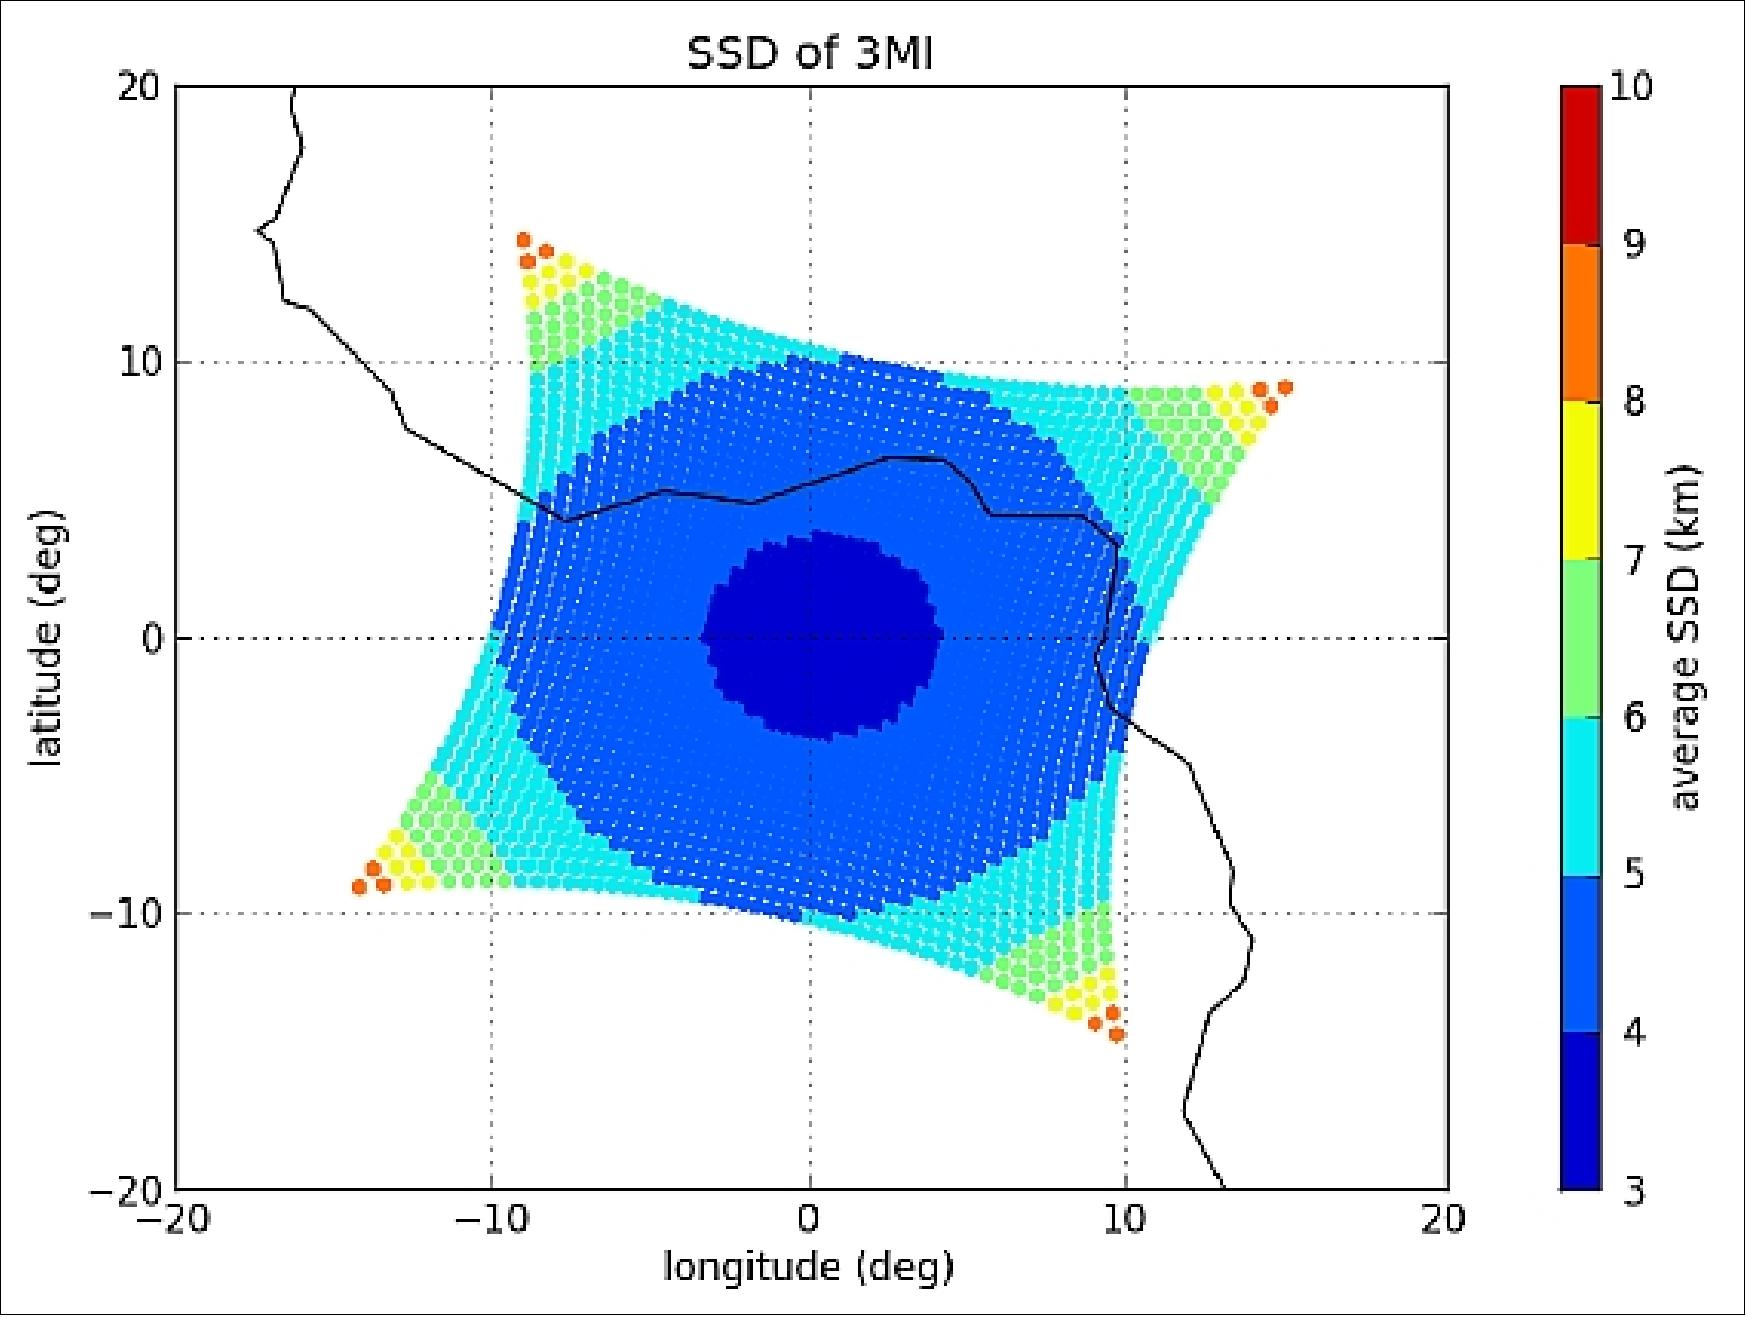 Figure 39: 3MI mean SSD variation across the FOV of the instrument (samples shown only for visualization purposes), image credit: ESA